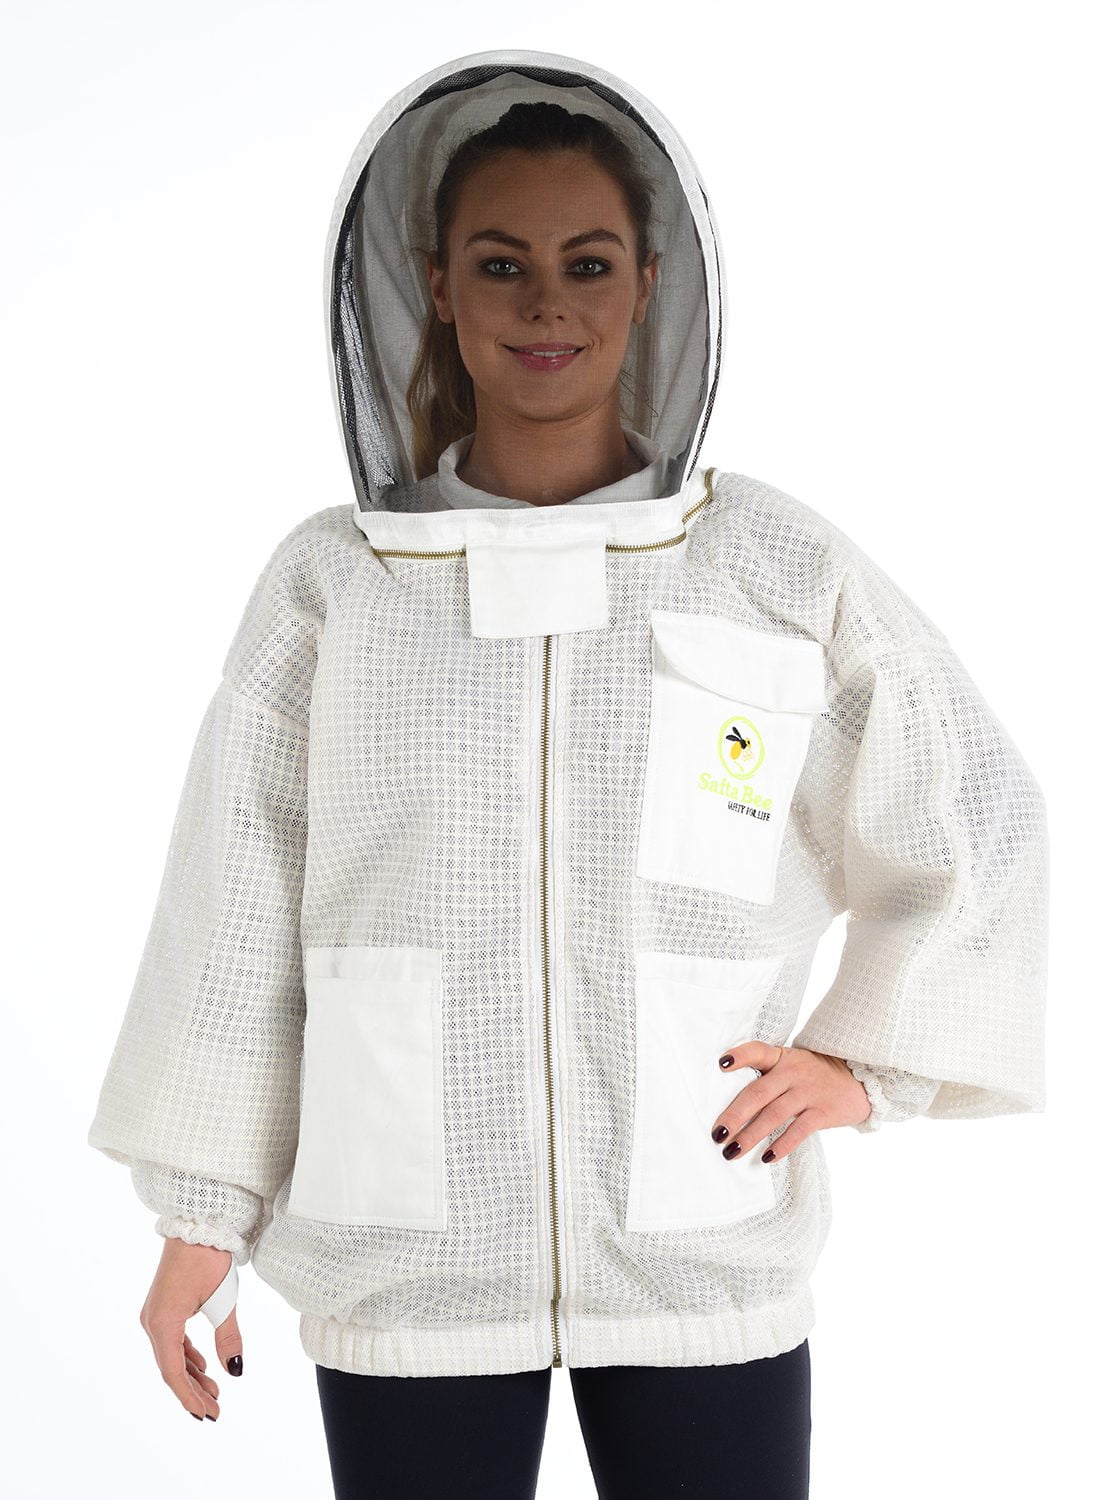 3 LAYER ULTRA VENTILATED BEEKEEPER BEEKEEPING JACKET WITH FENCING VEIL & GLOVES 